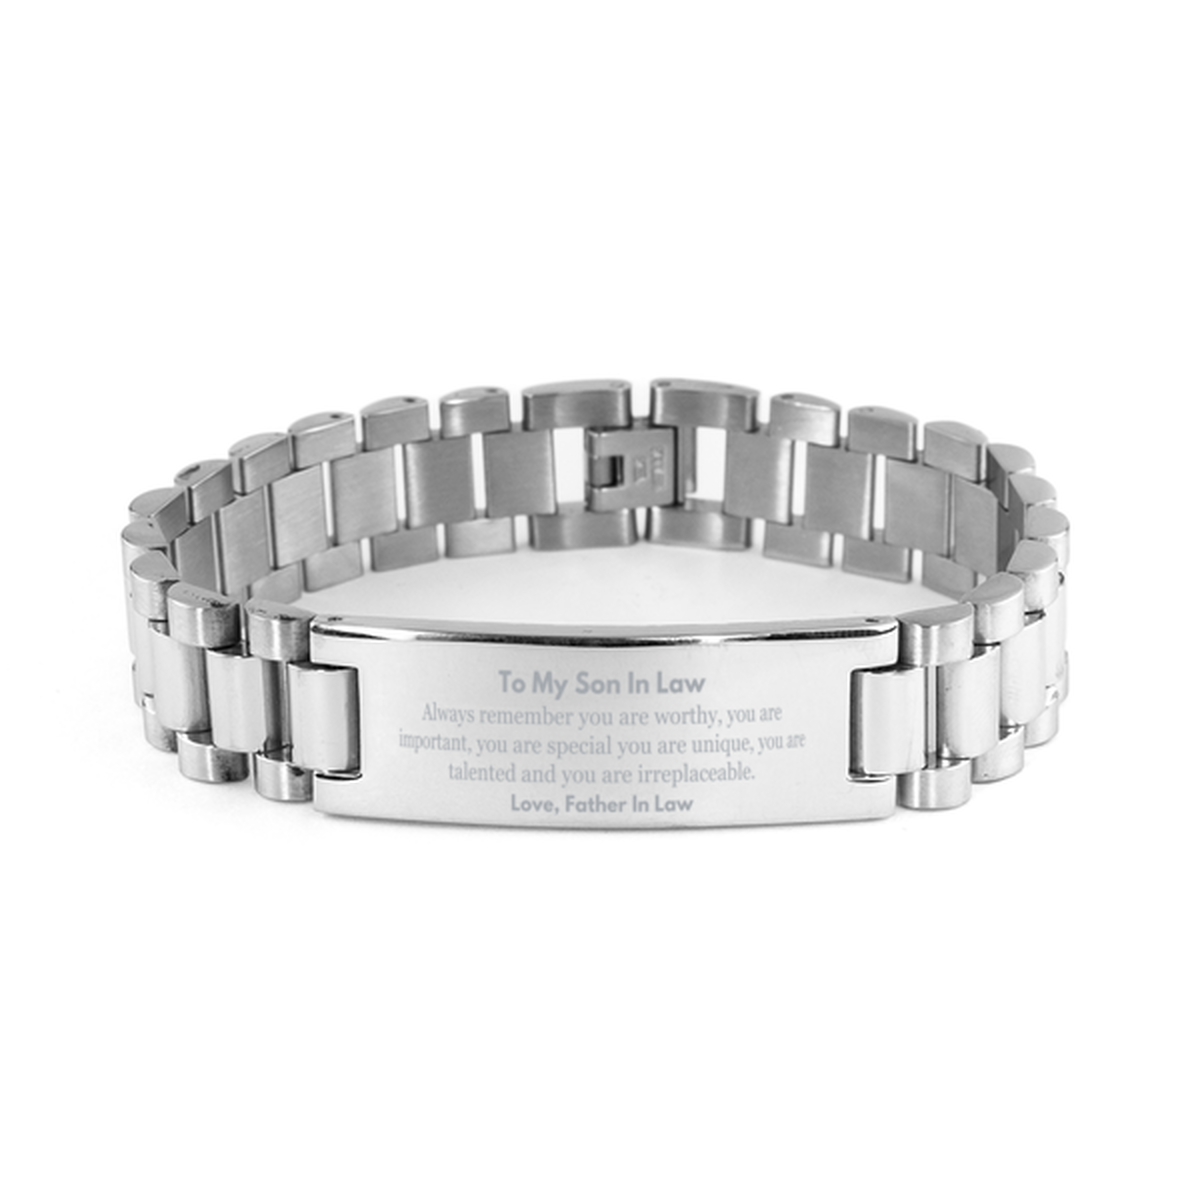 Son In Law Birthday Gifts from Father In Law, Inspirational Ladder Stainless Steel Bracelet for Son In Law Christmas Graduation Gifts for Son In Law Always remember you are worthy, you are important. Love, Father In Law